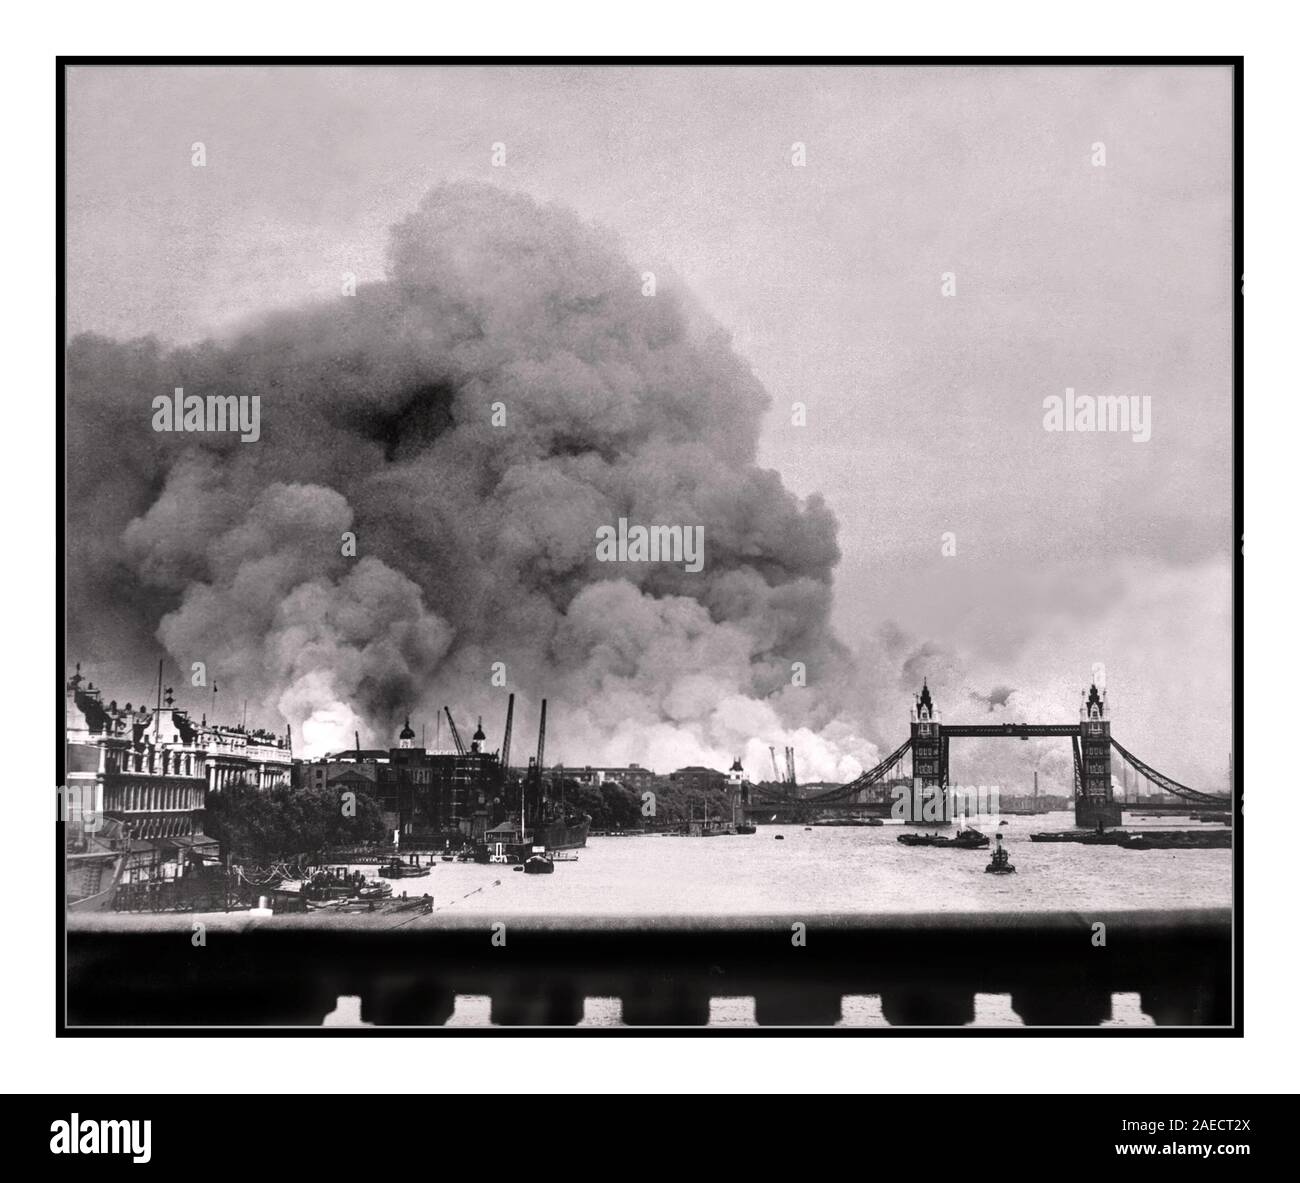 TOWER BRIDGE 1940's London Blitz Vintage image made during the first mass blitz bombing air raid on London, 7th September 1940, the scene in London’s docklands area. Tower Bridge (painted black to reduce its visibility) featured standing against a background of smoke and fires from Nazi Germany Luftwaffe terror bombing Stock Photo